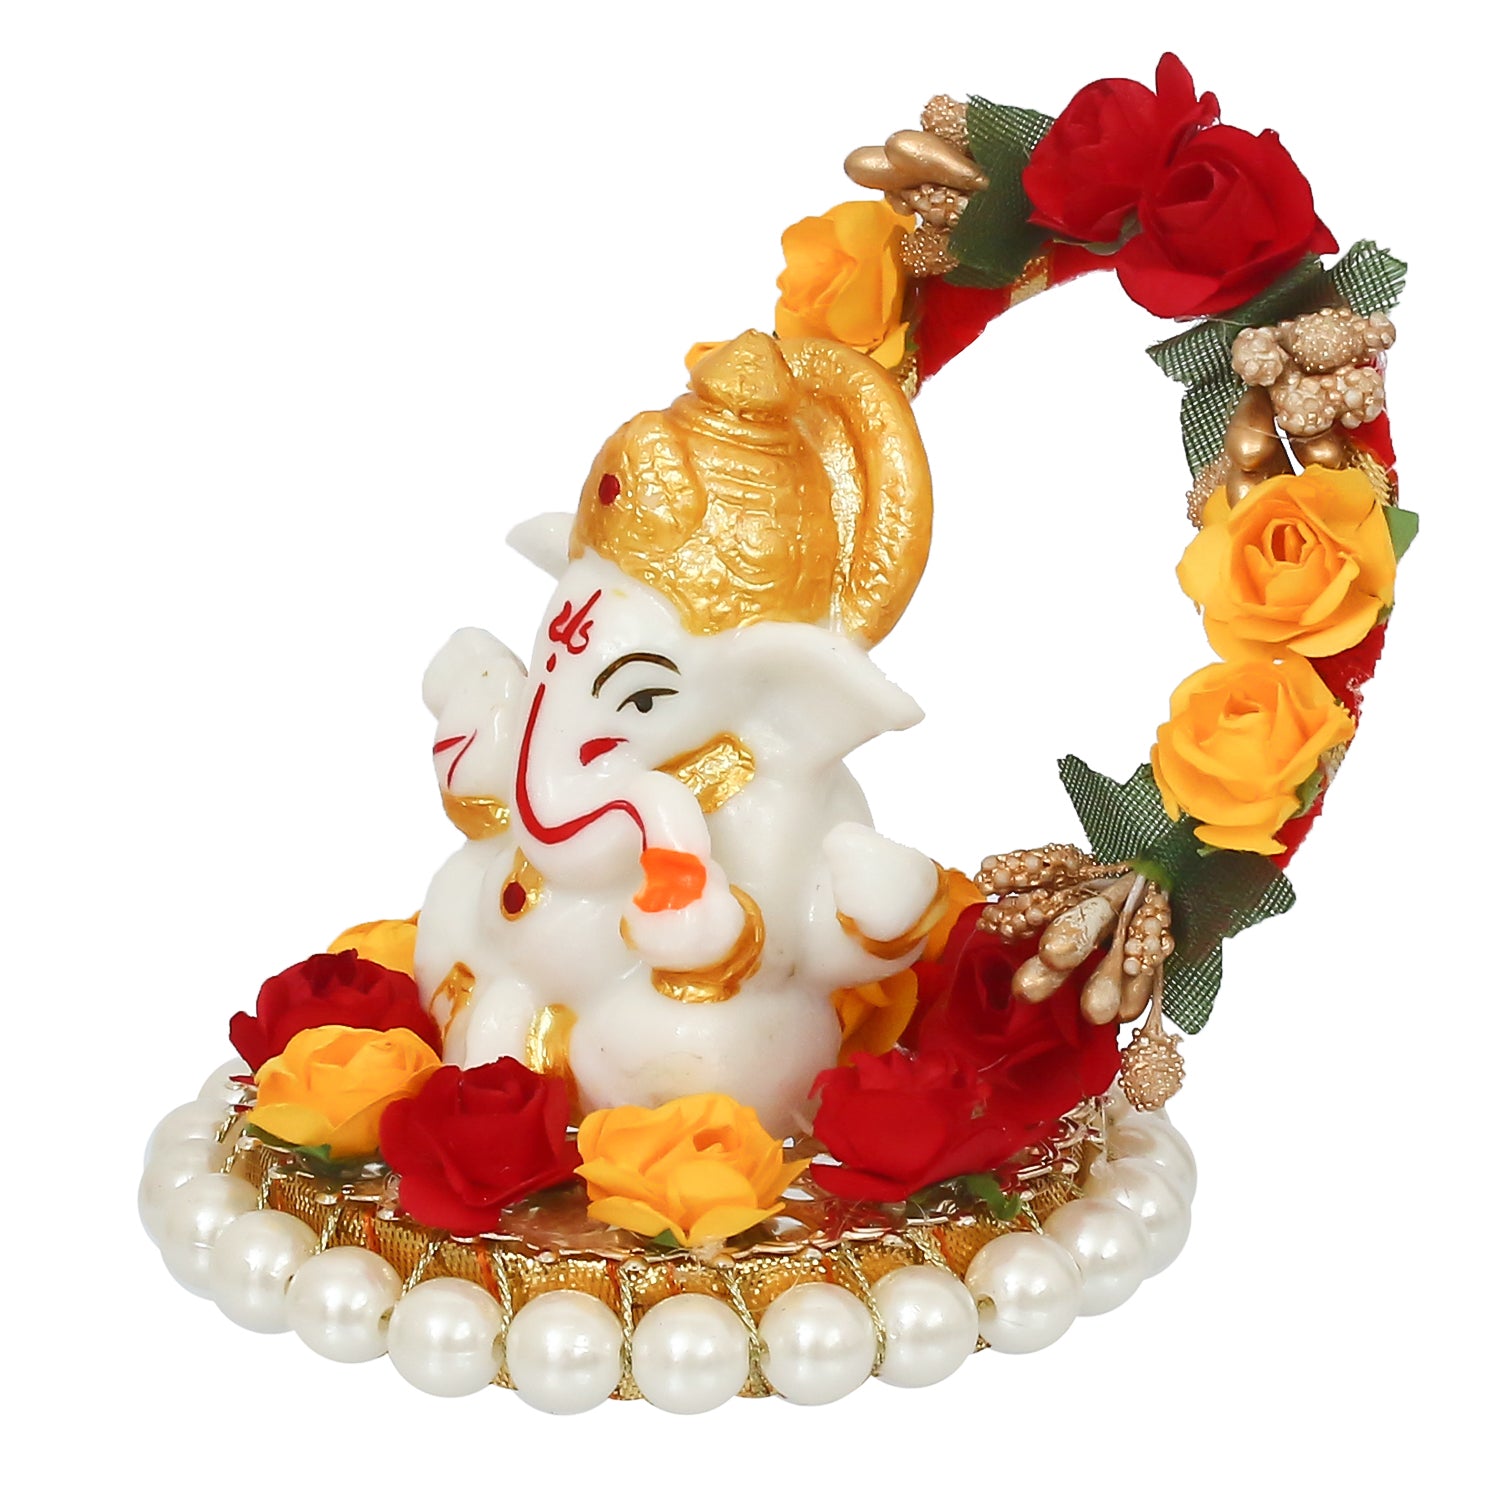 Polyresin Lord Ganesha Idol on Decorative Handcrafted Rose Flower Plate for Home and Car Dashboard 4